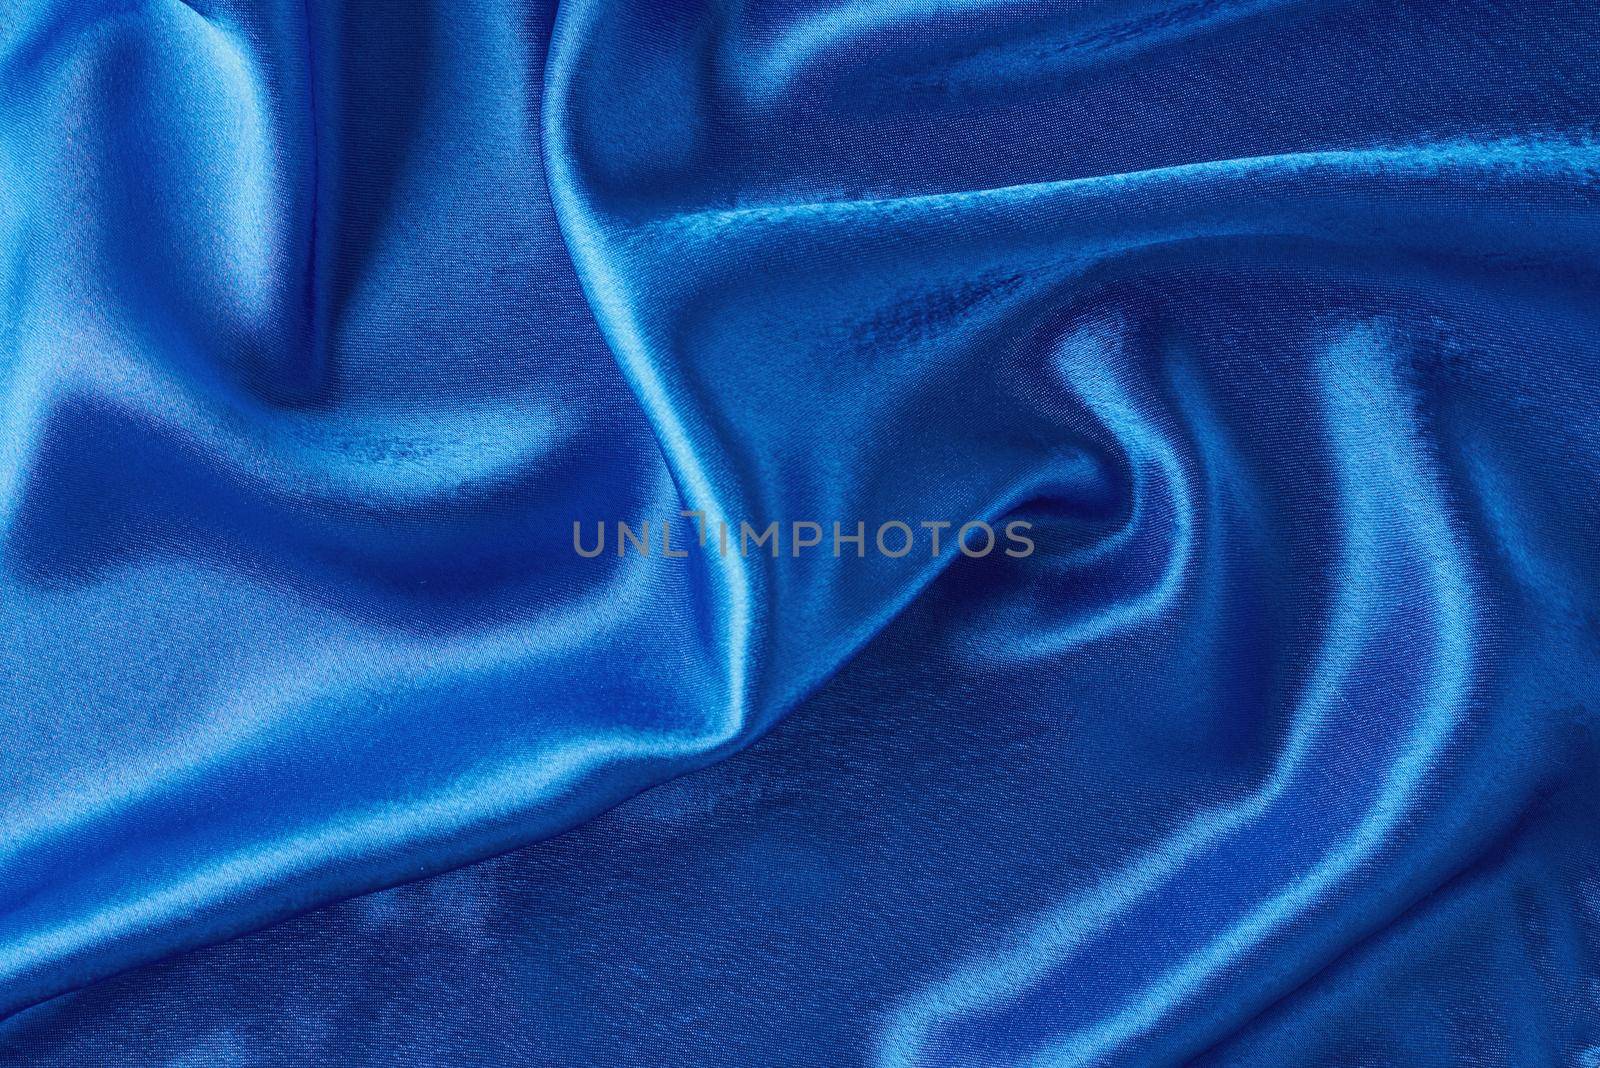 Blue silk background with a folds. Abstract texture of rippled satin surface by Lazy_Bear